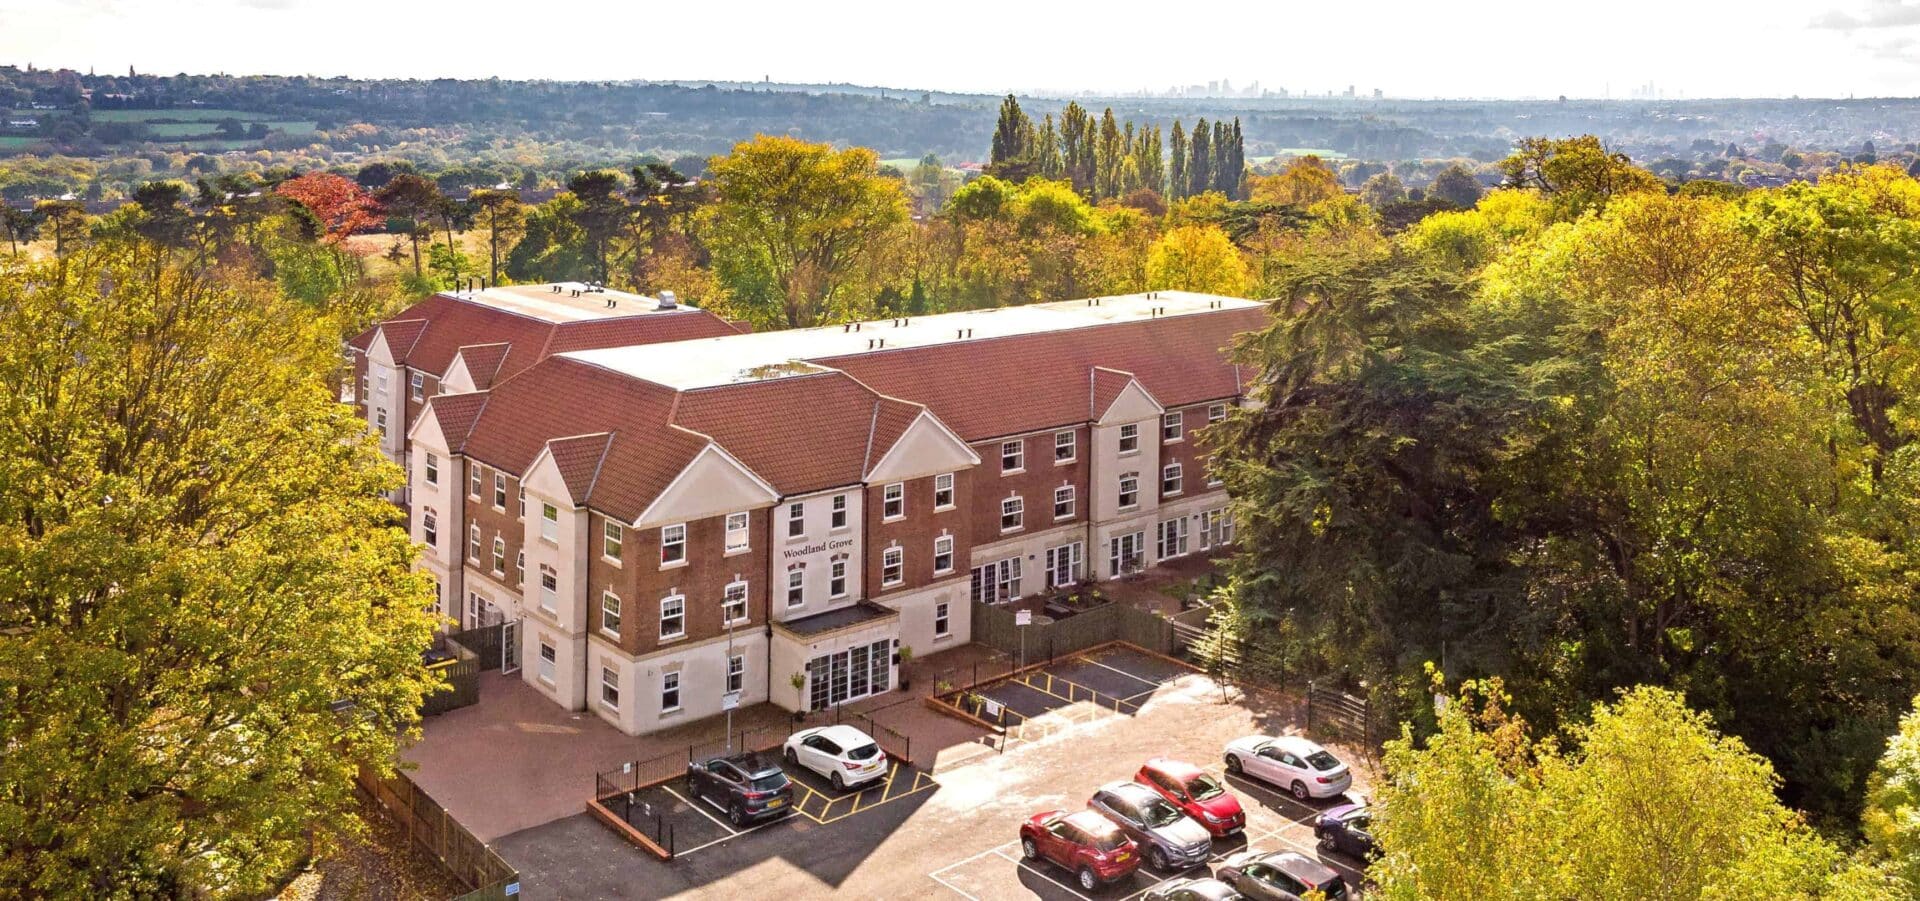 Aerial view of Woodland Grove Care Home in Loughton